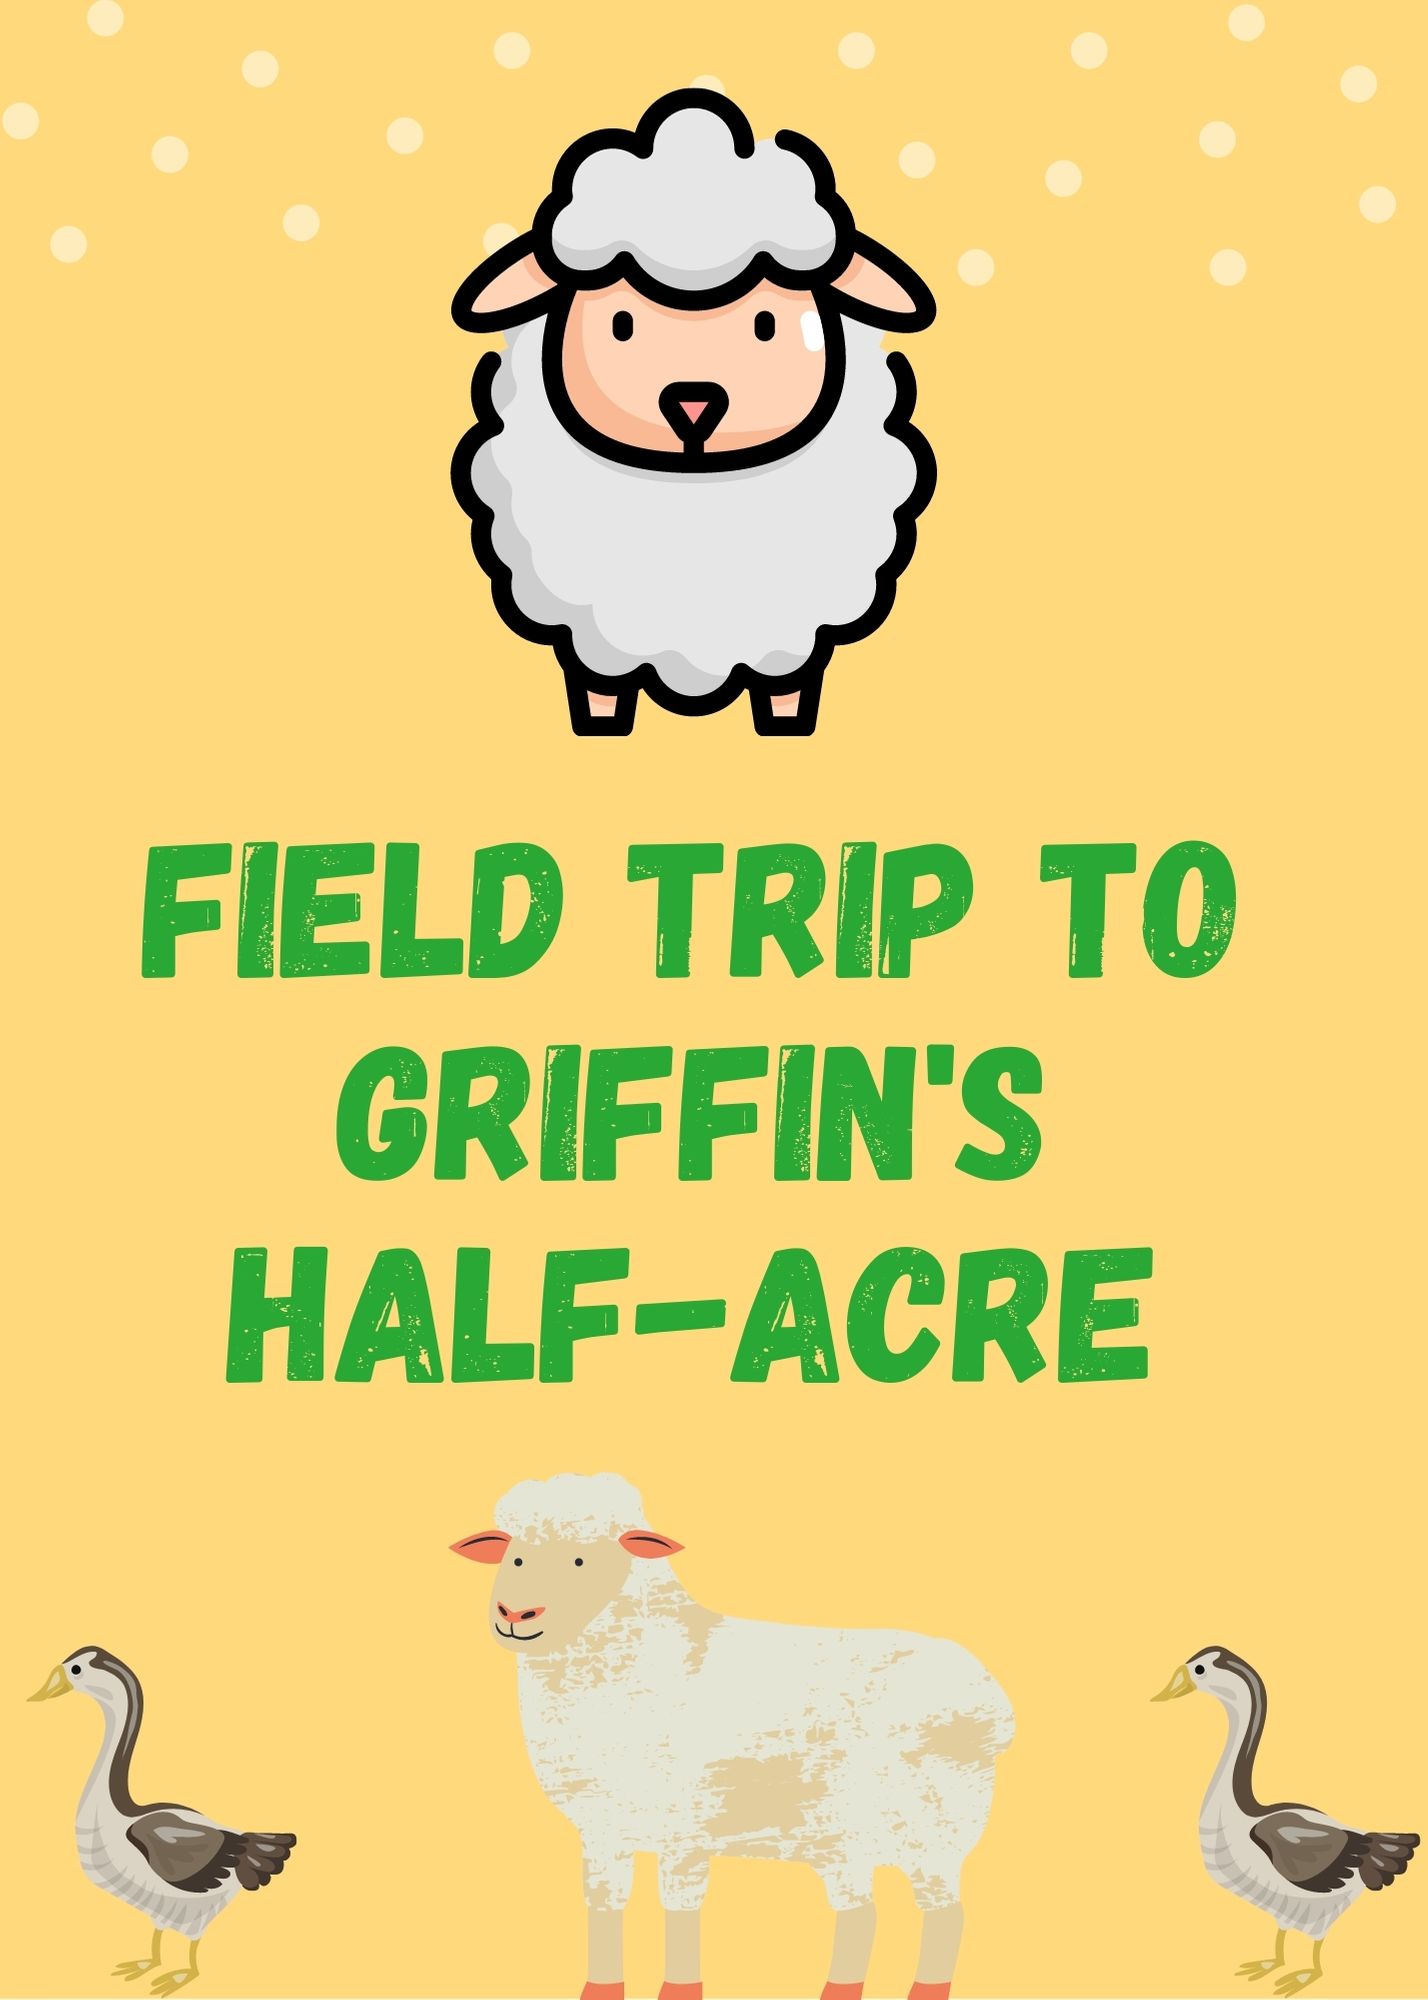 Yellow flyer with cartoon images of sheep and geese with text "Field Trip to Griffin's Half-Acre"